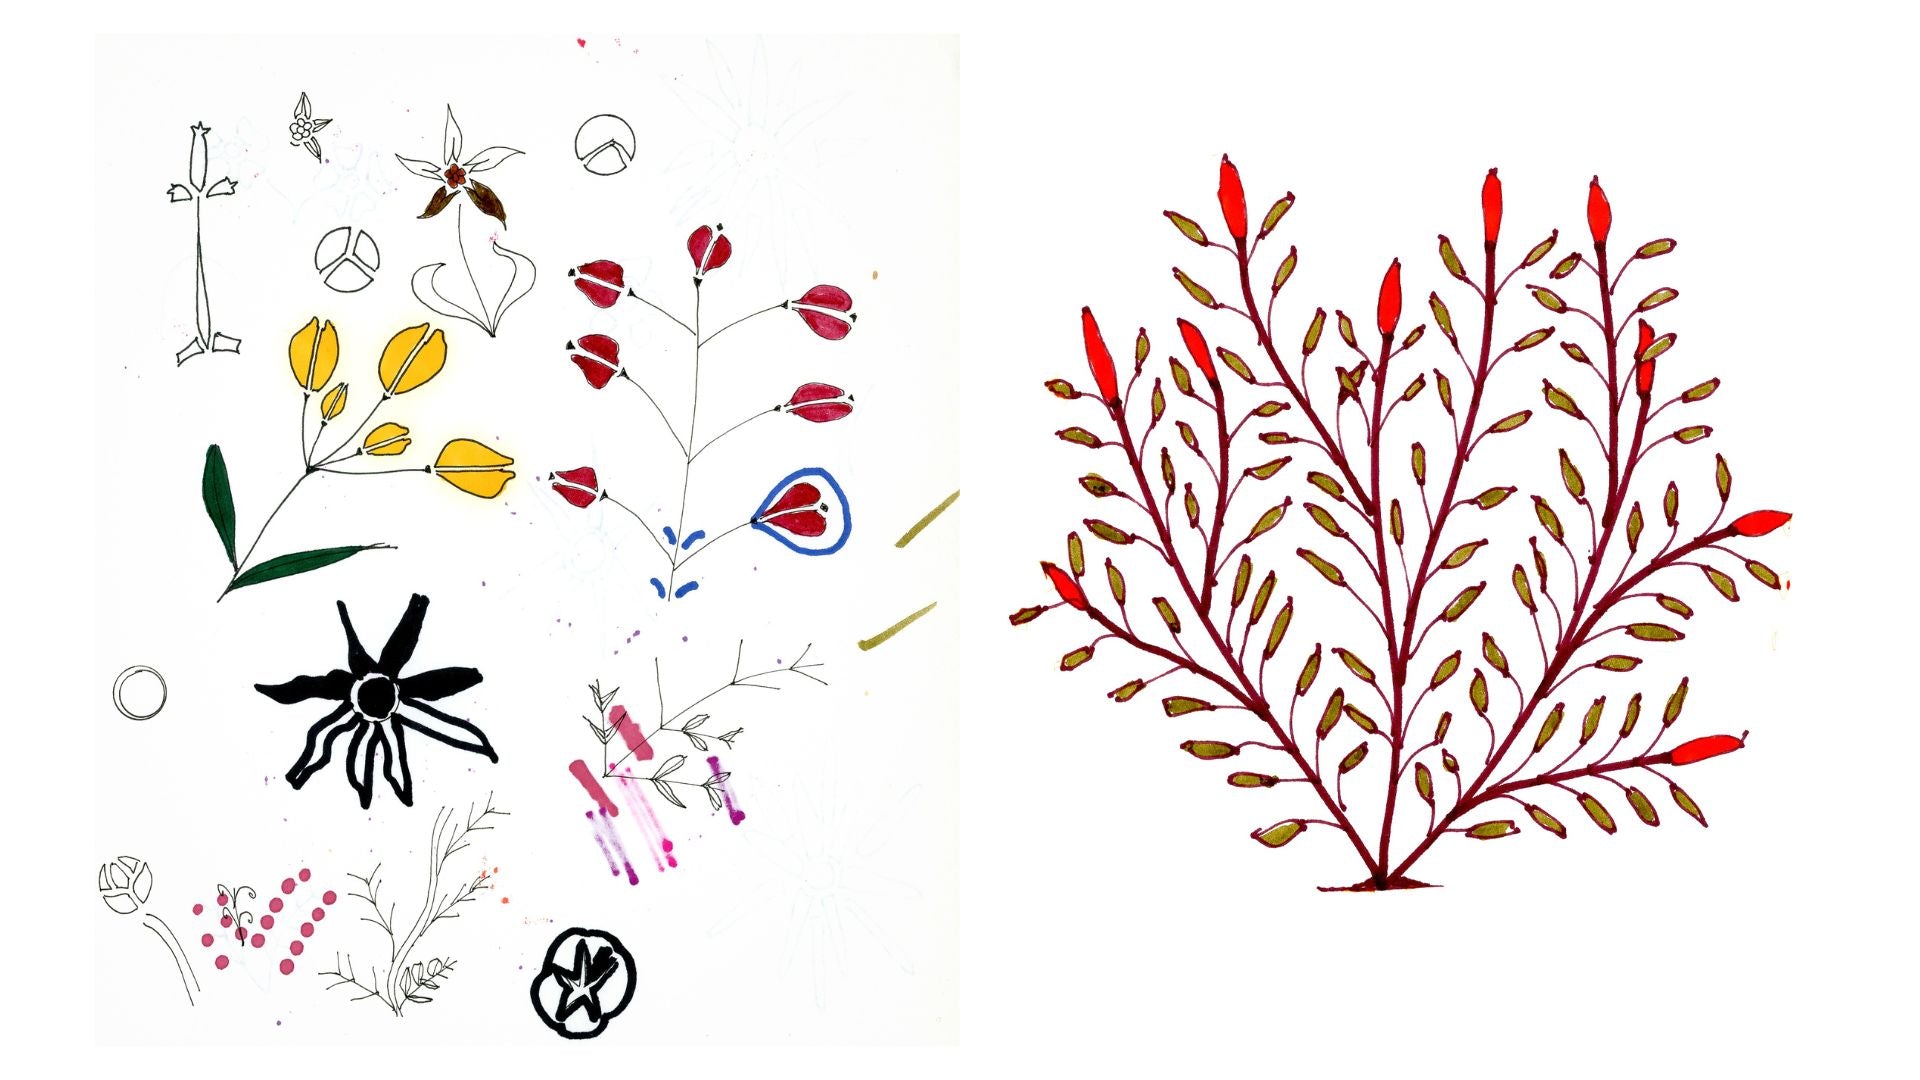 floral illustrations by pamina ewing